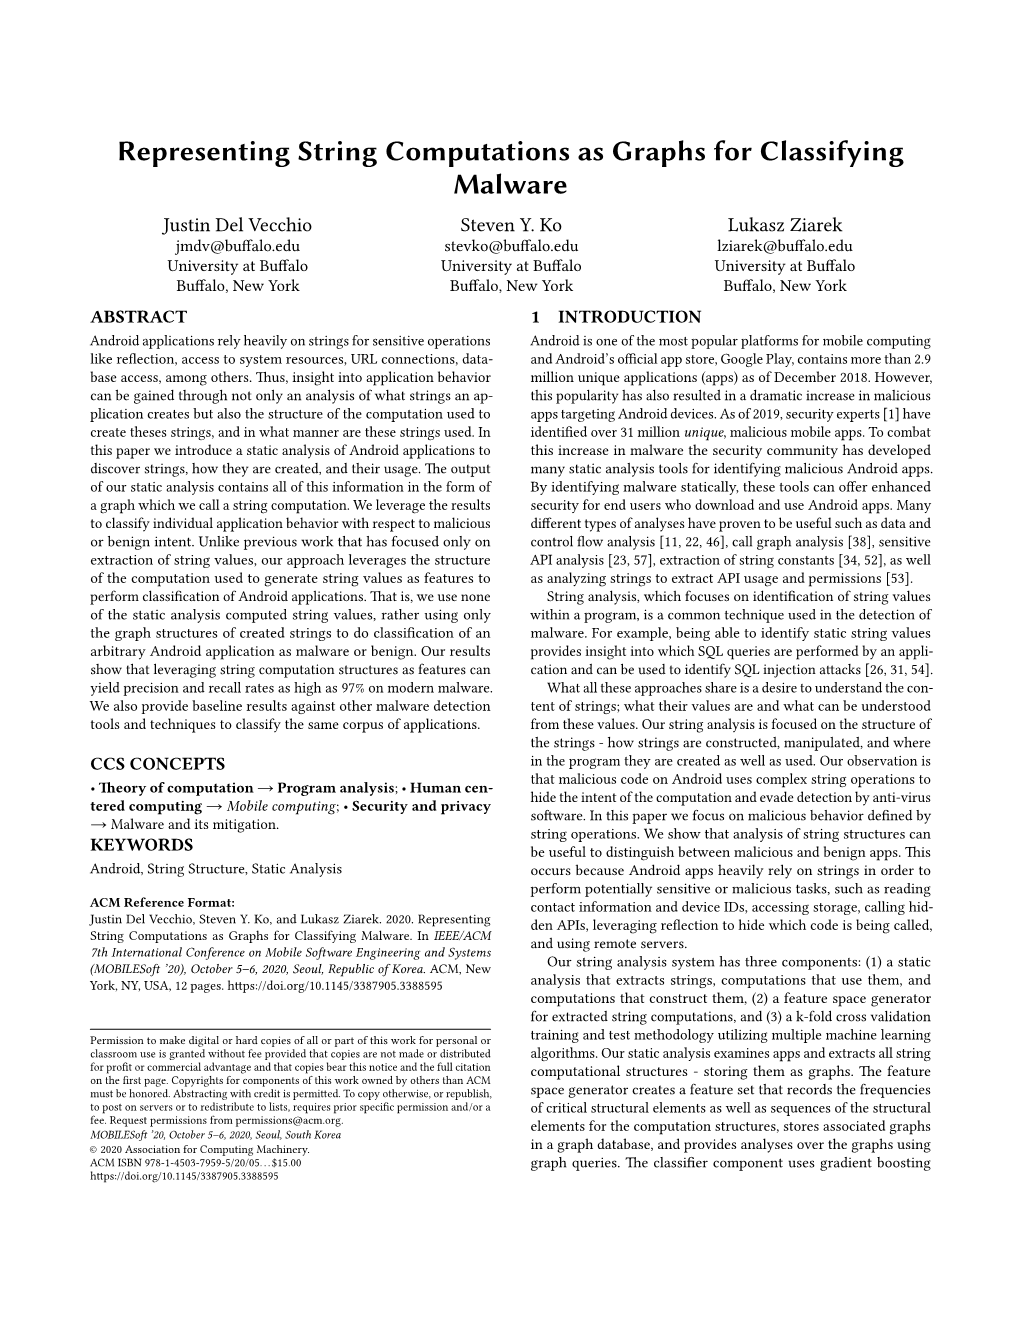 Representing String Computations As Graphs for Classifying Malware Justin Del Vecchio Steven Y